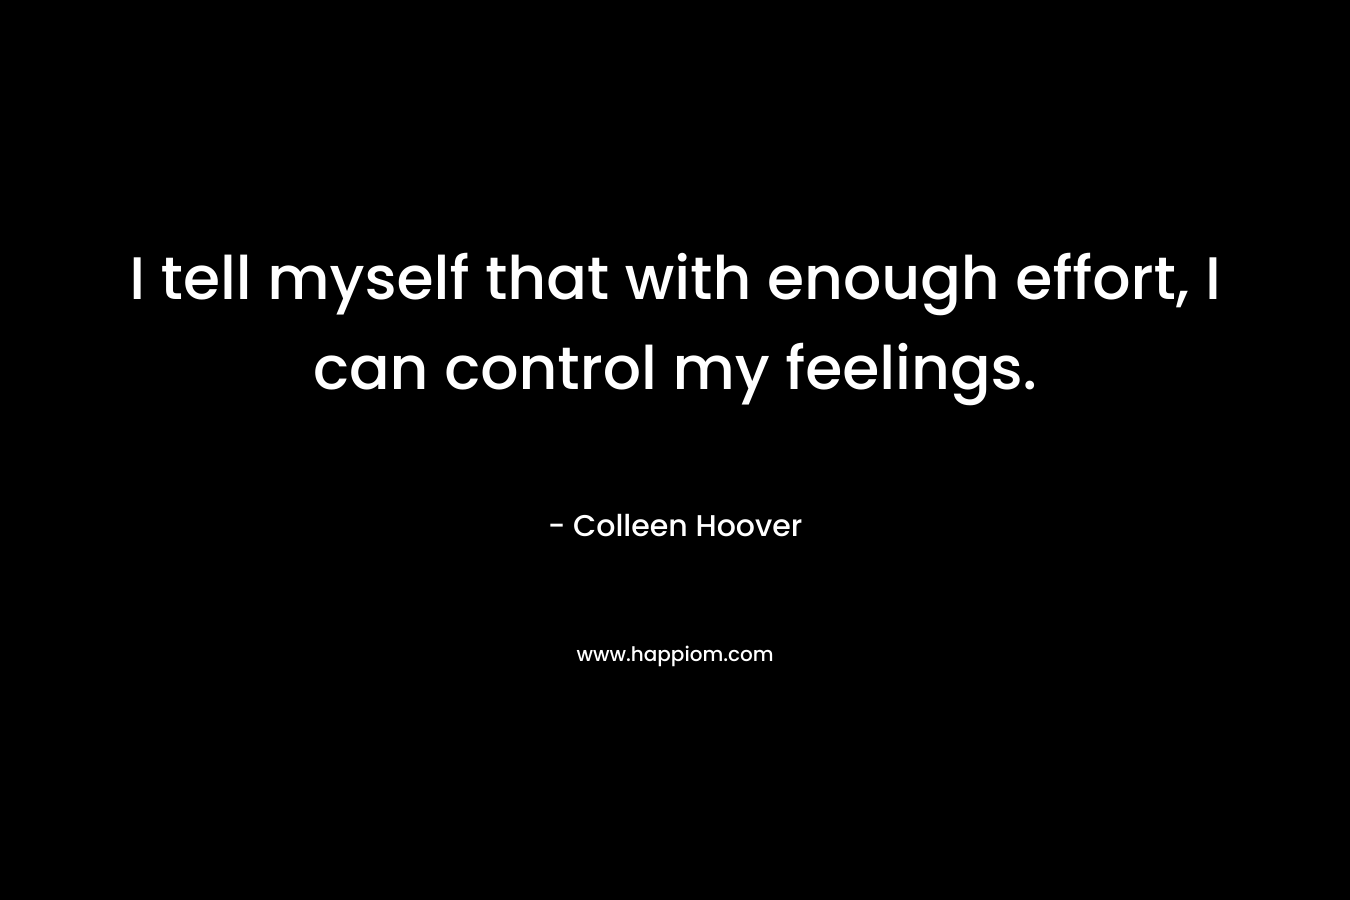 I tell myself that with enough effort, I can control my feelings.